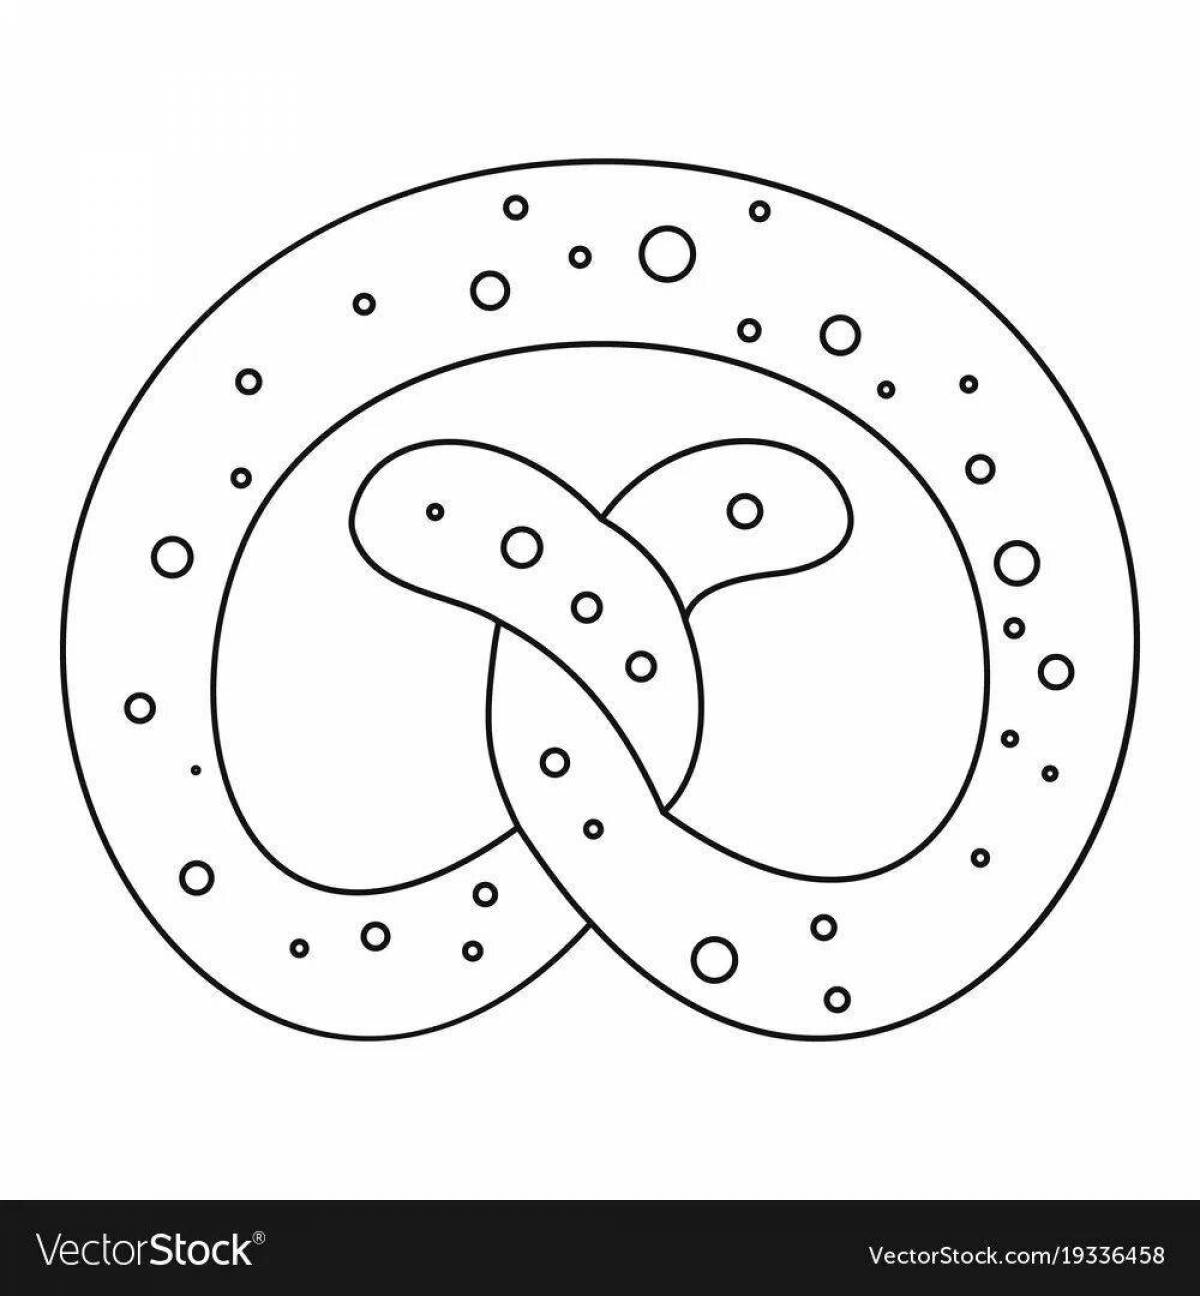 Creative donut coloring for kids